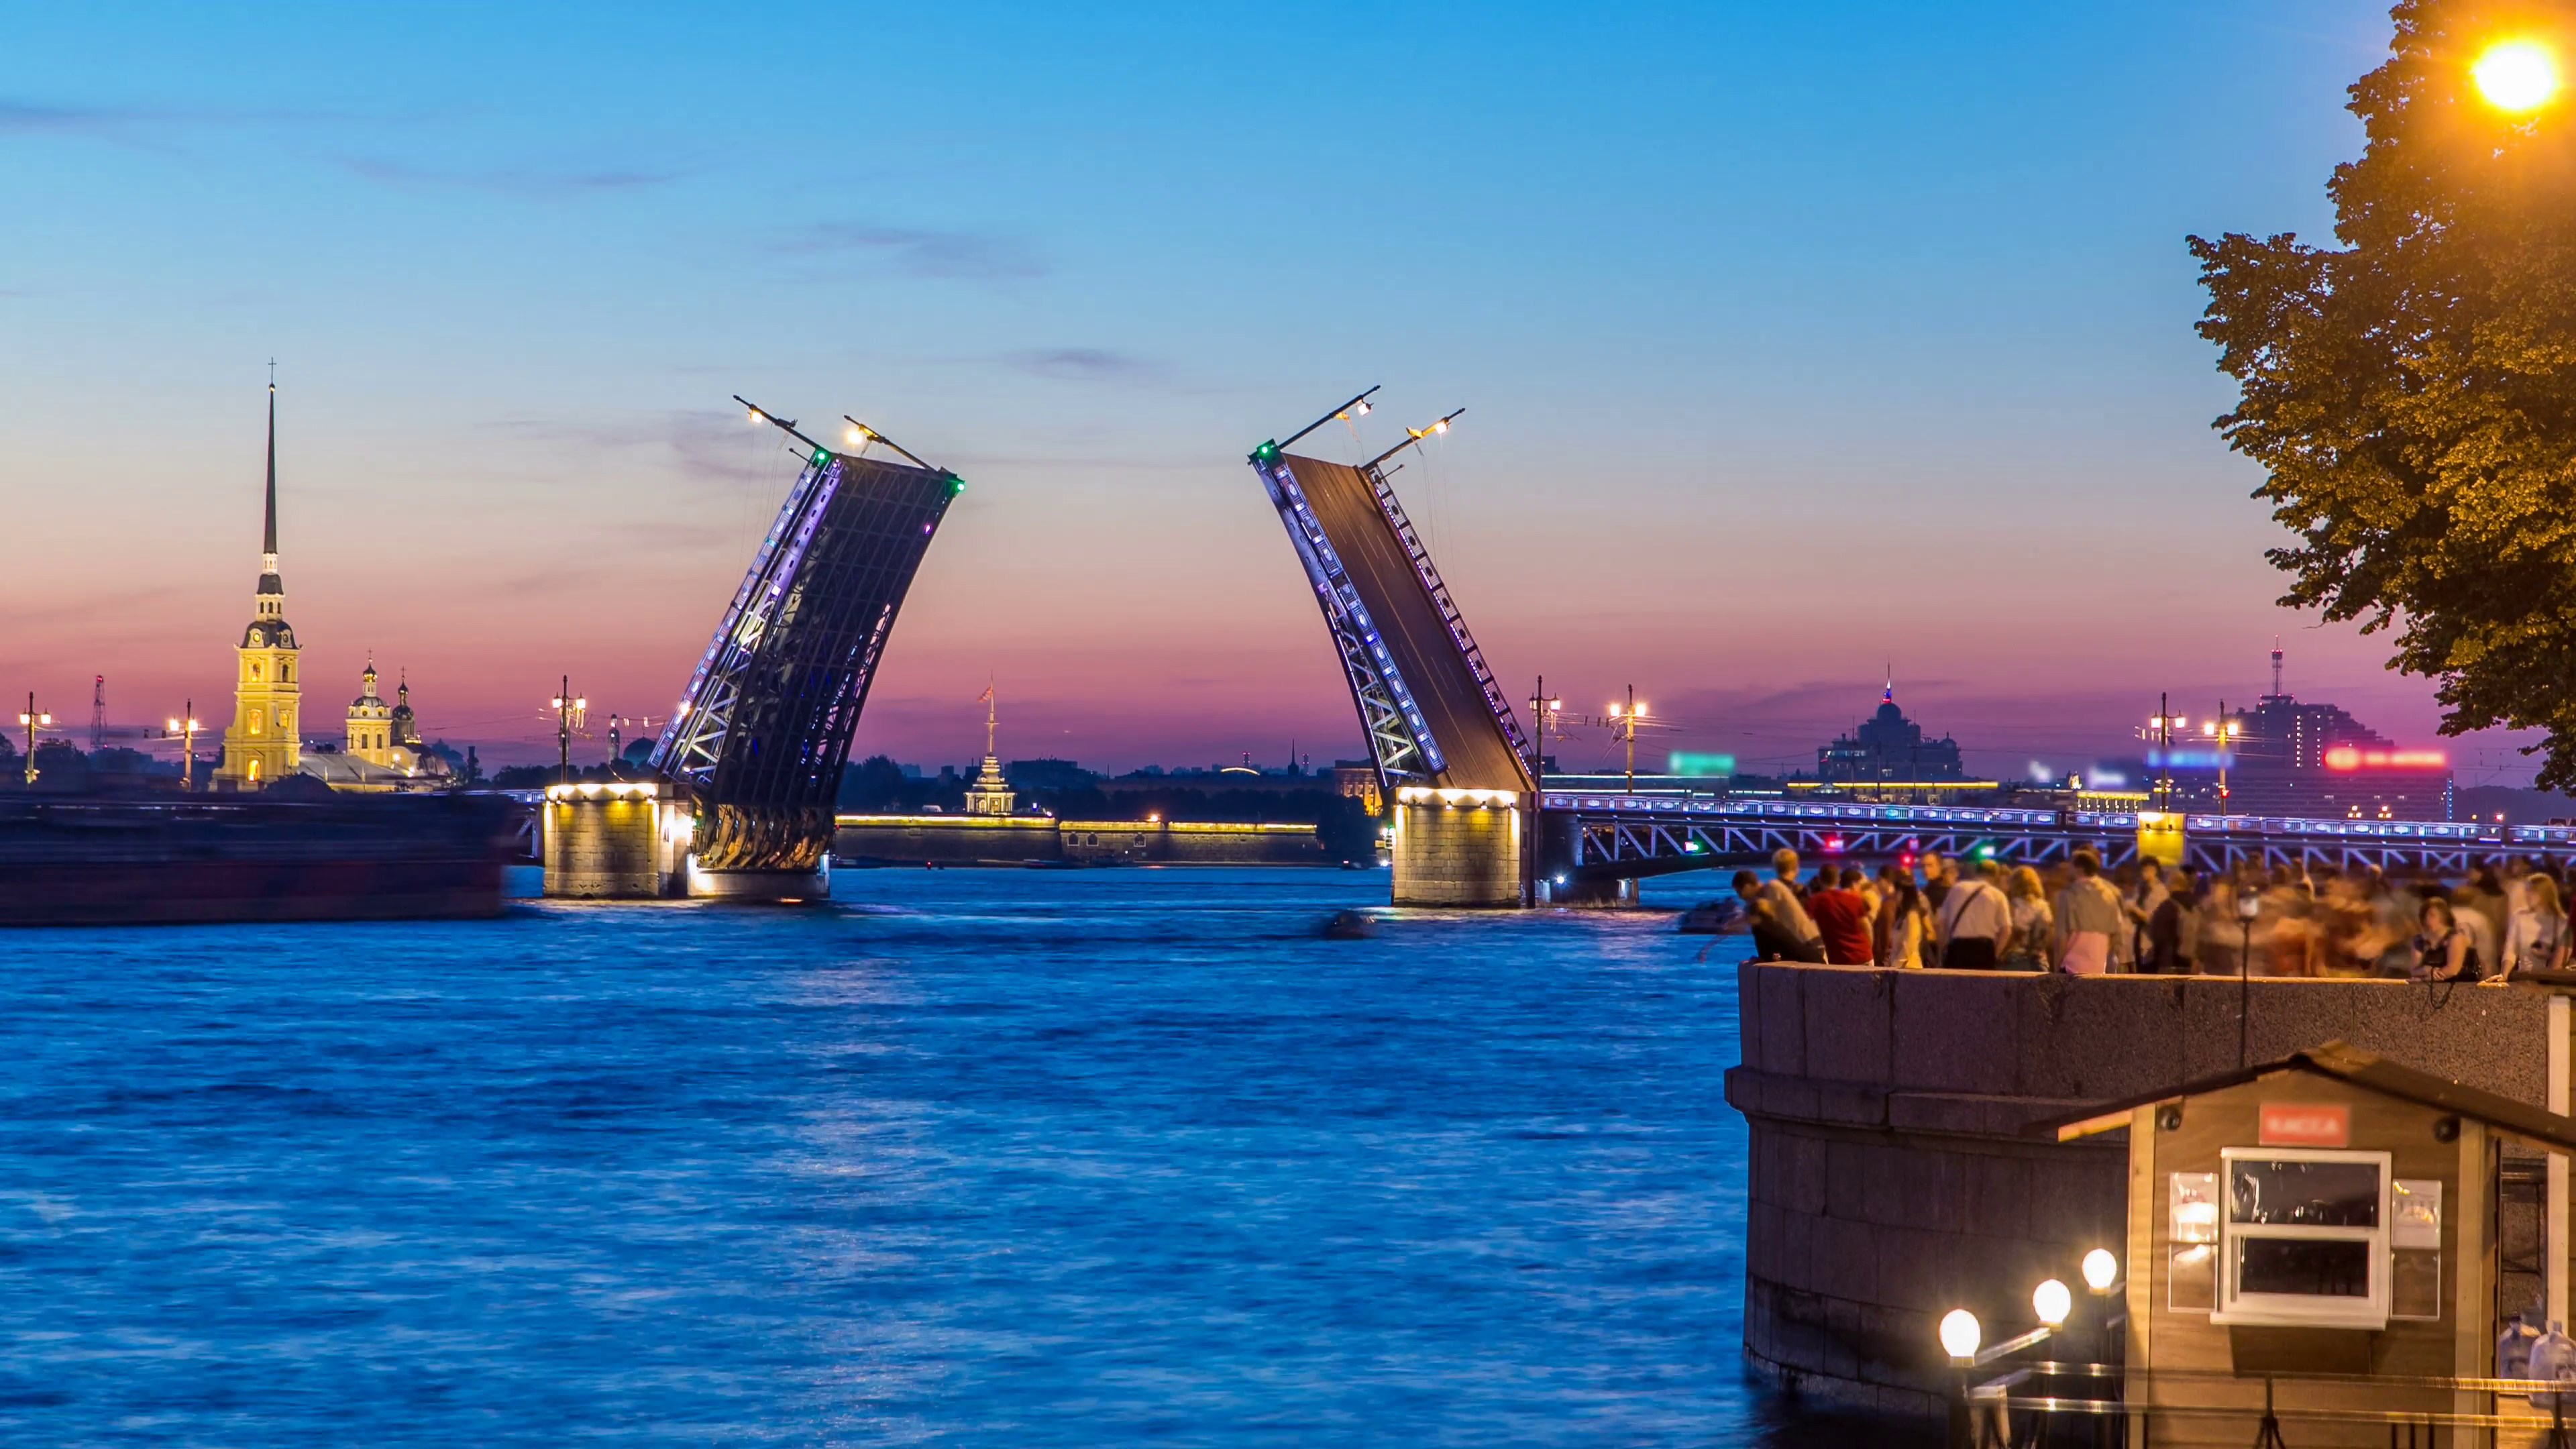 Classic symbol of St. Petersburg White Nights - a romantic view of ...